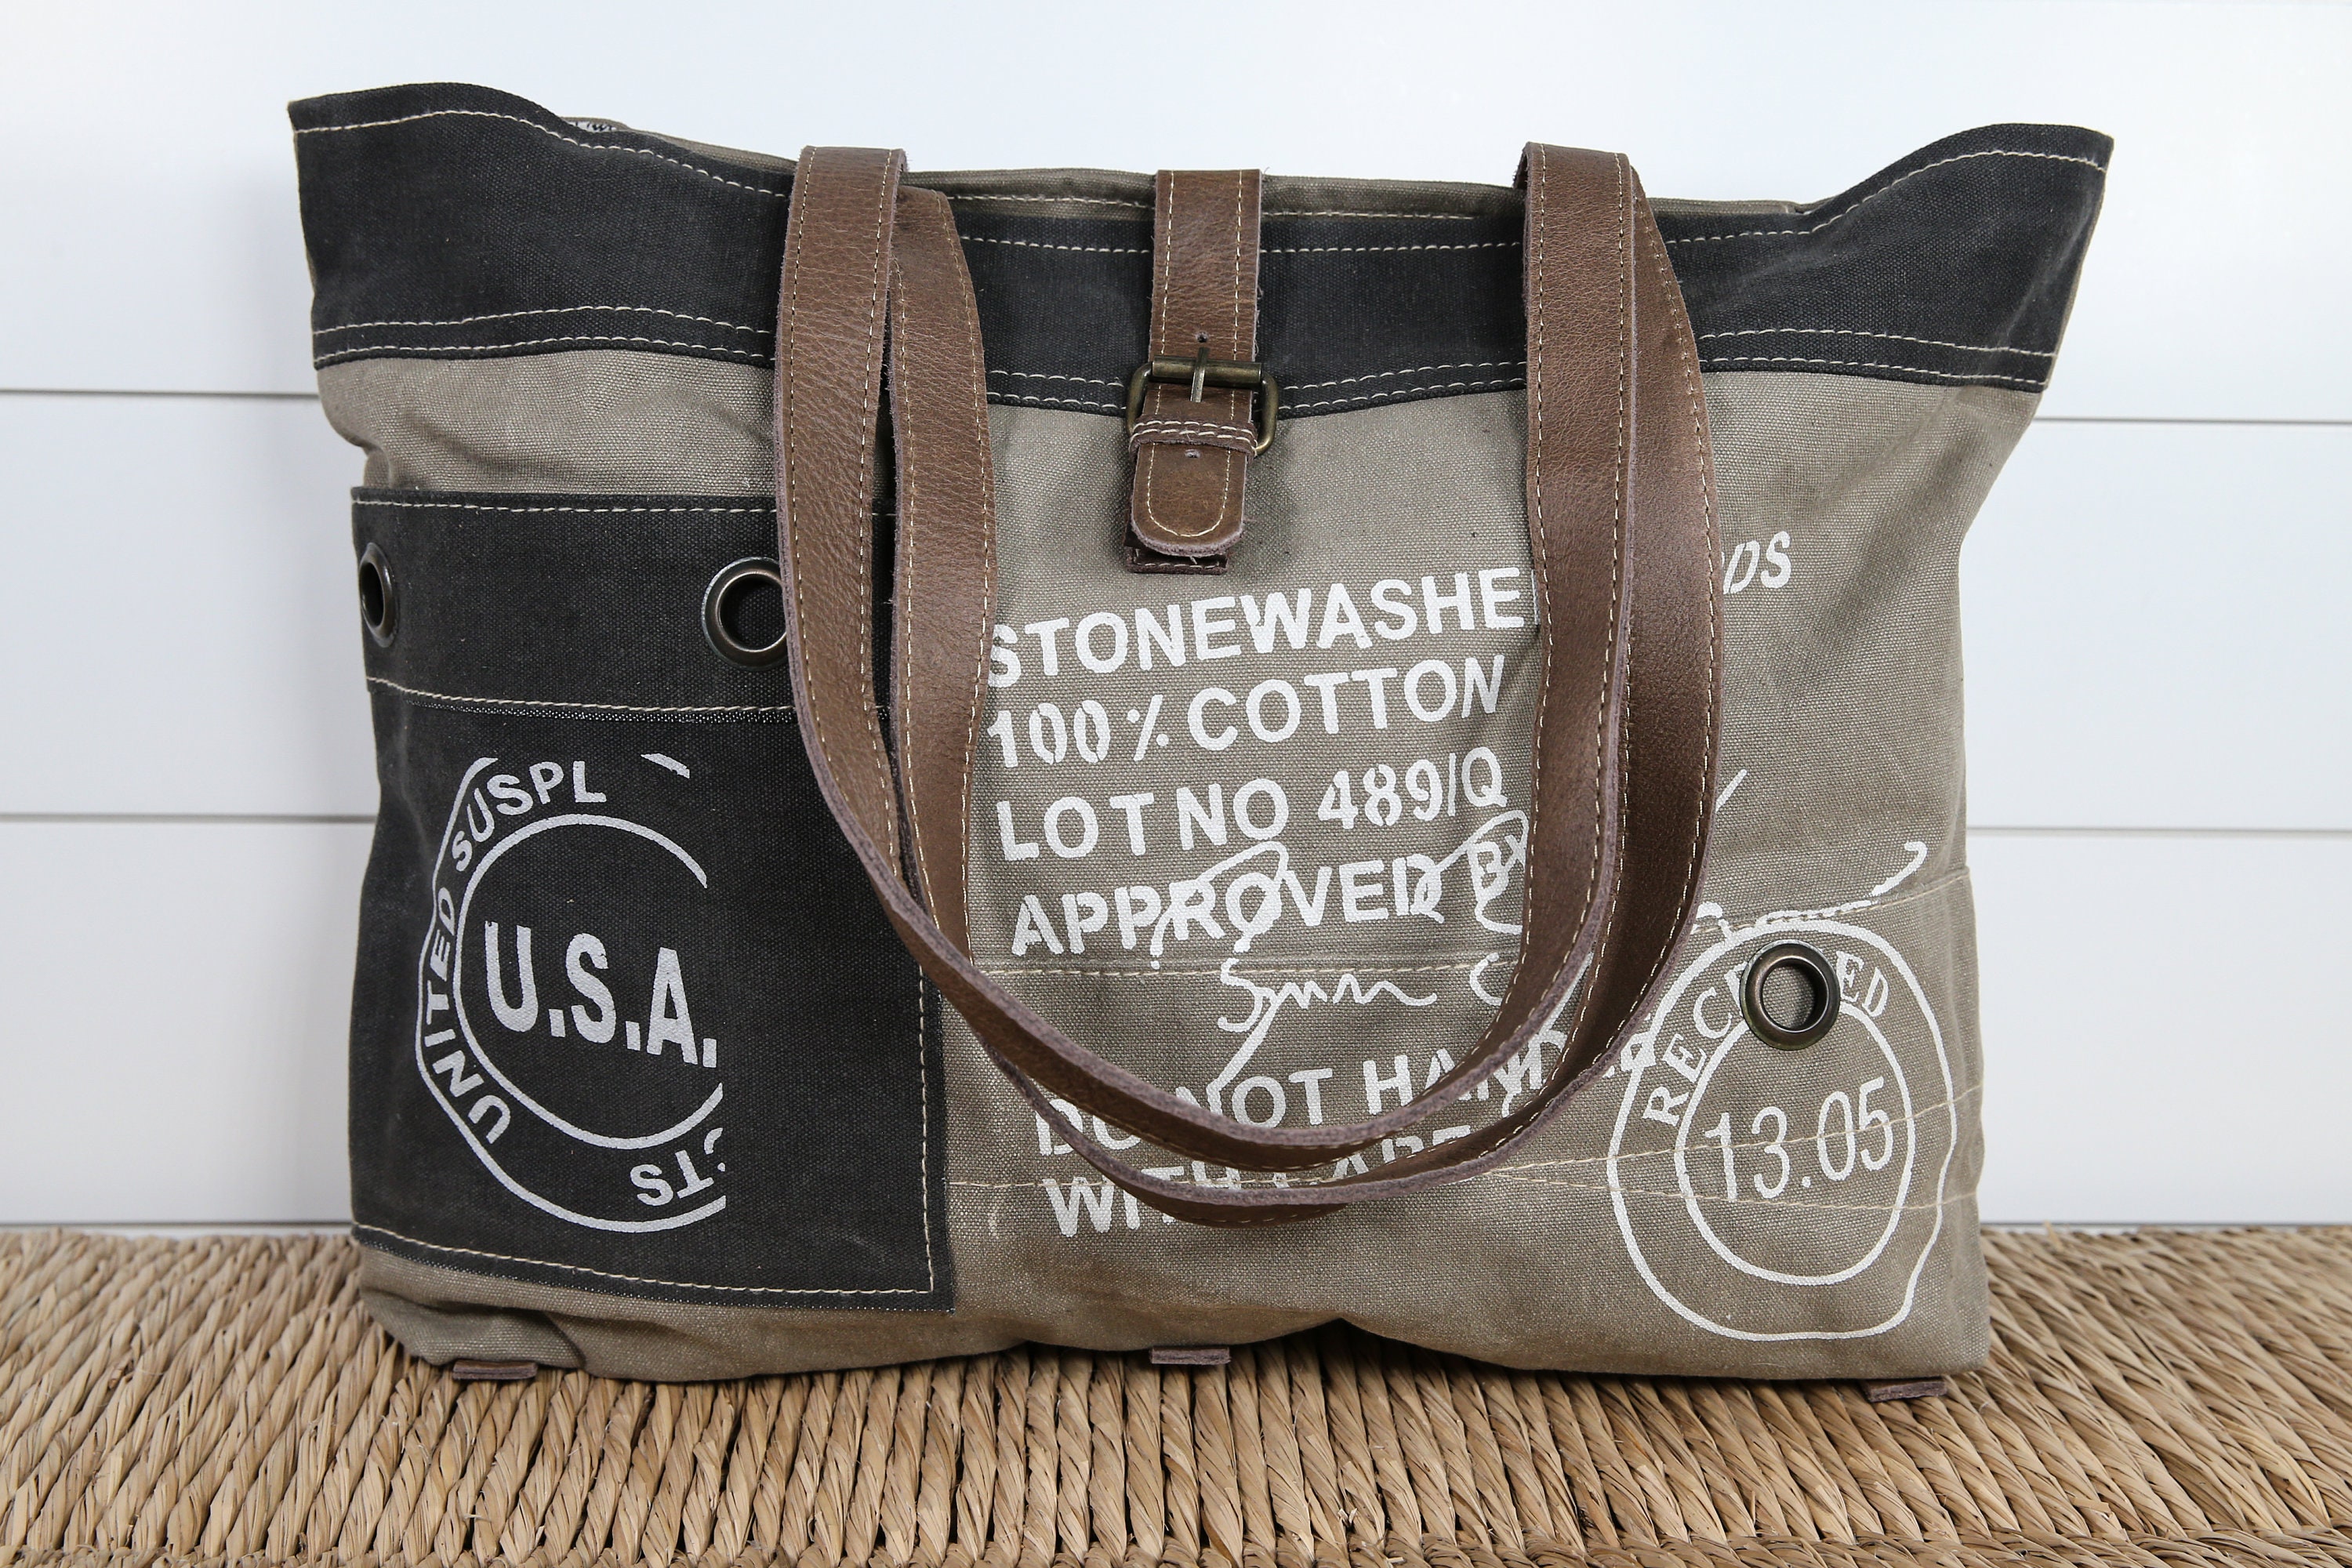 Review: Waxed canvas bags from Filson, Ona, Croots and more | TechCrunch